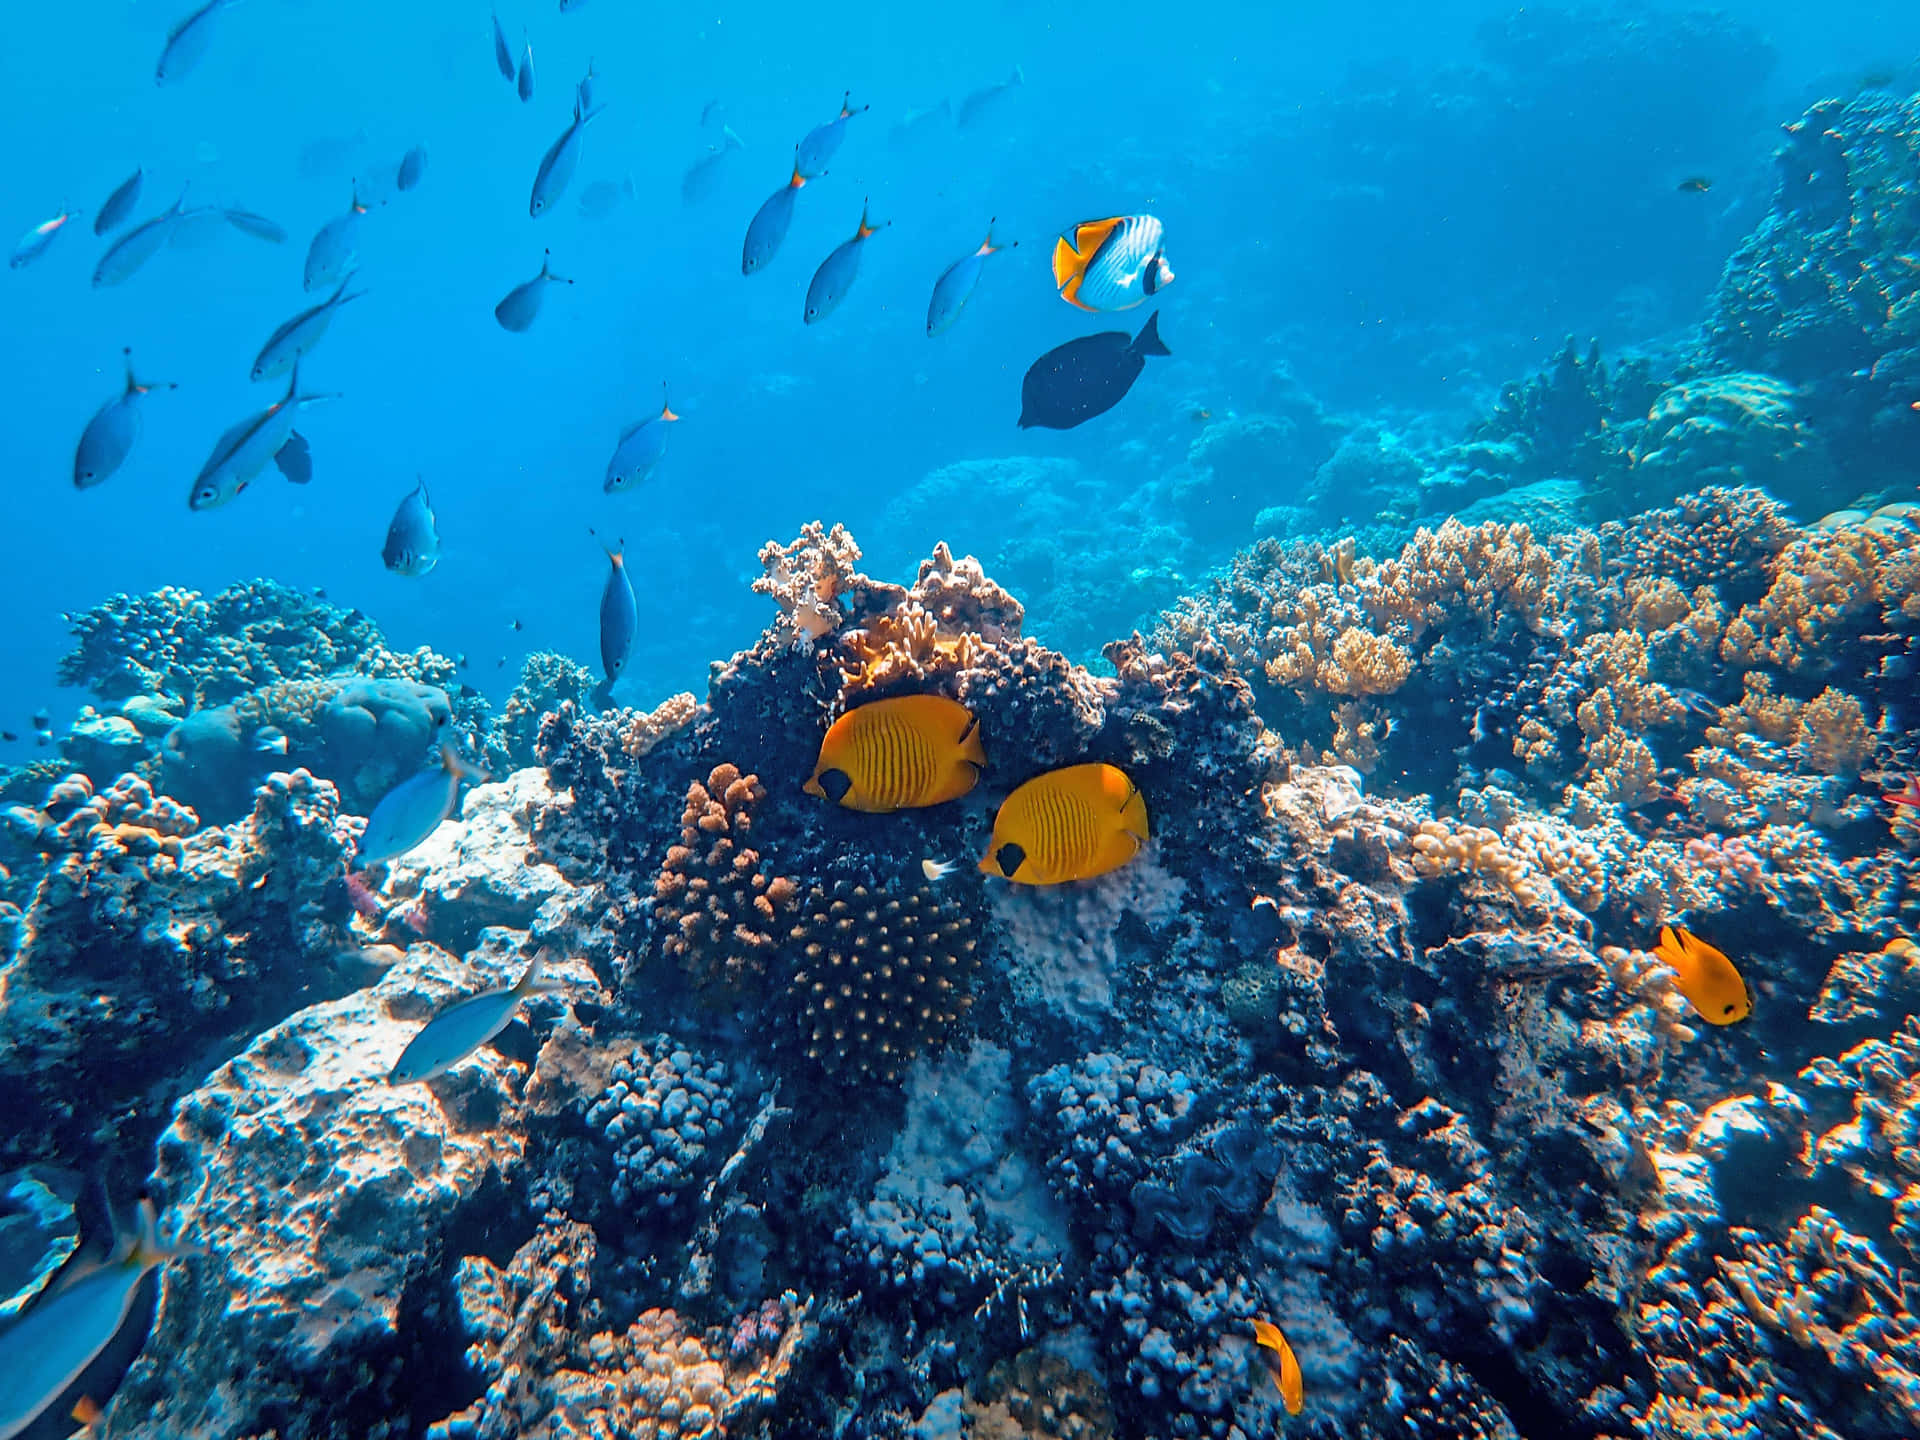 A vibrant and picturesque coral reef in the ocean